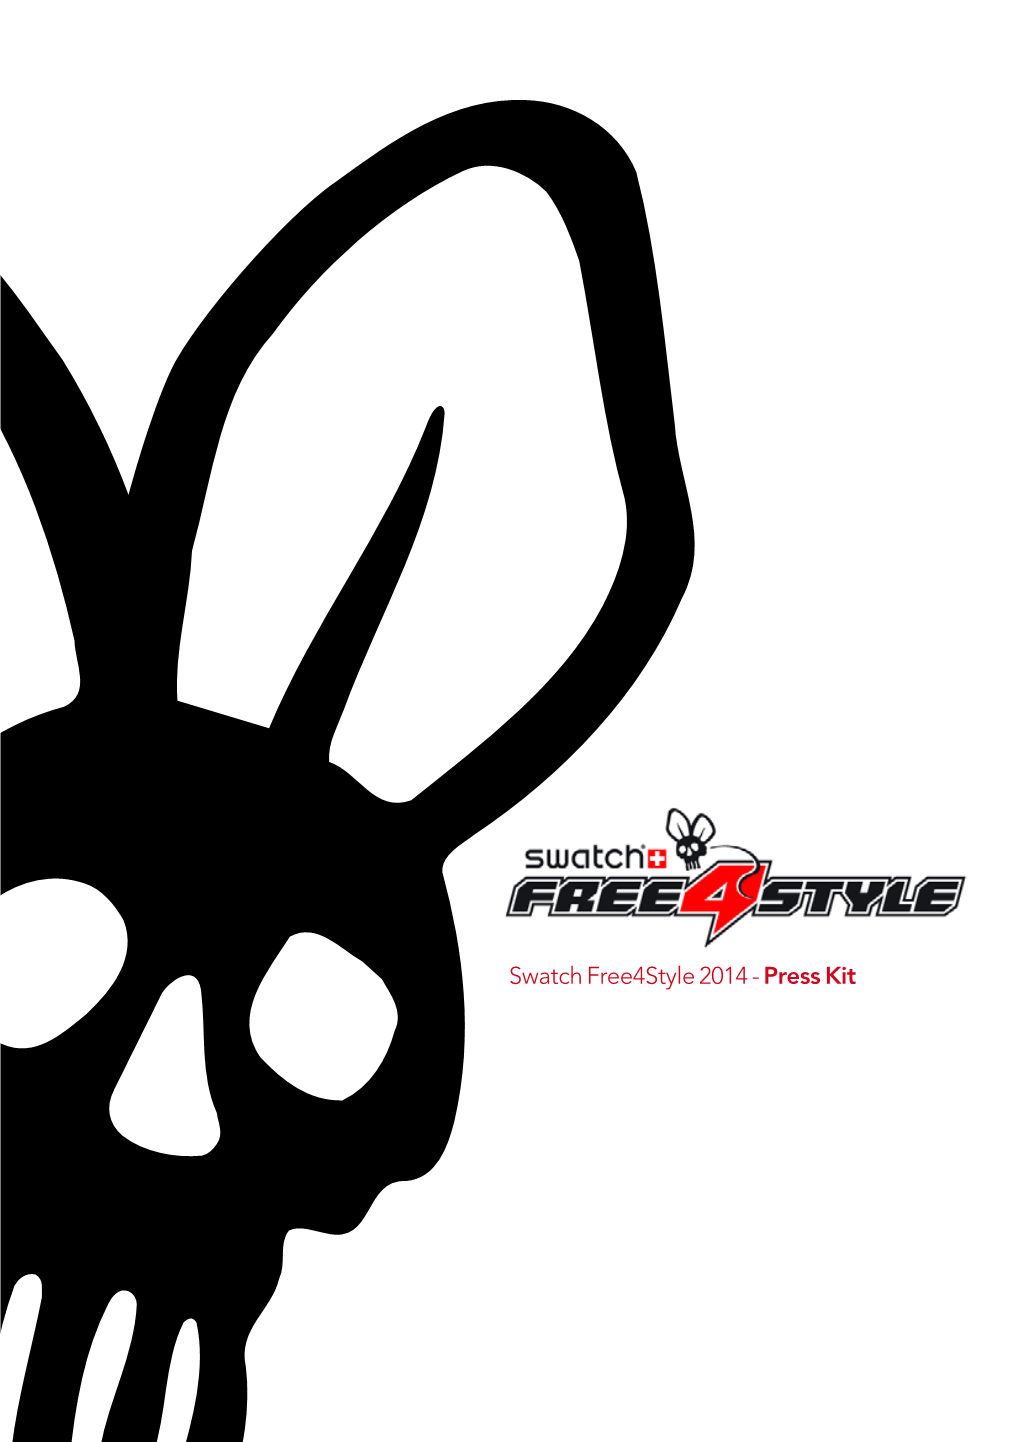 Swatch Free4style 2014 - Press Kit Editorial